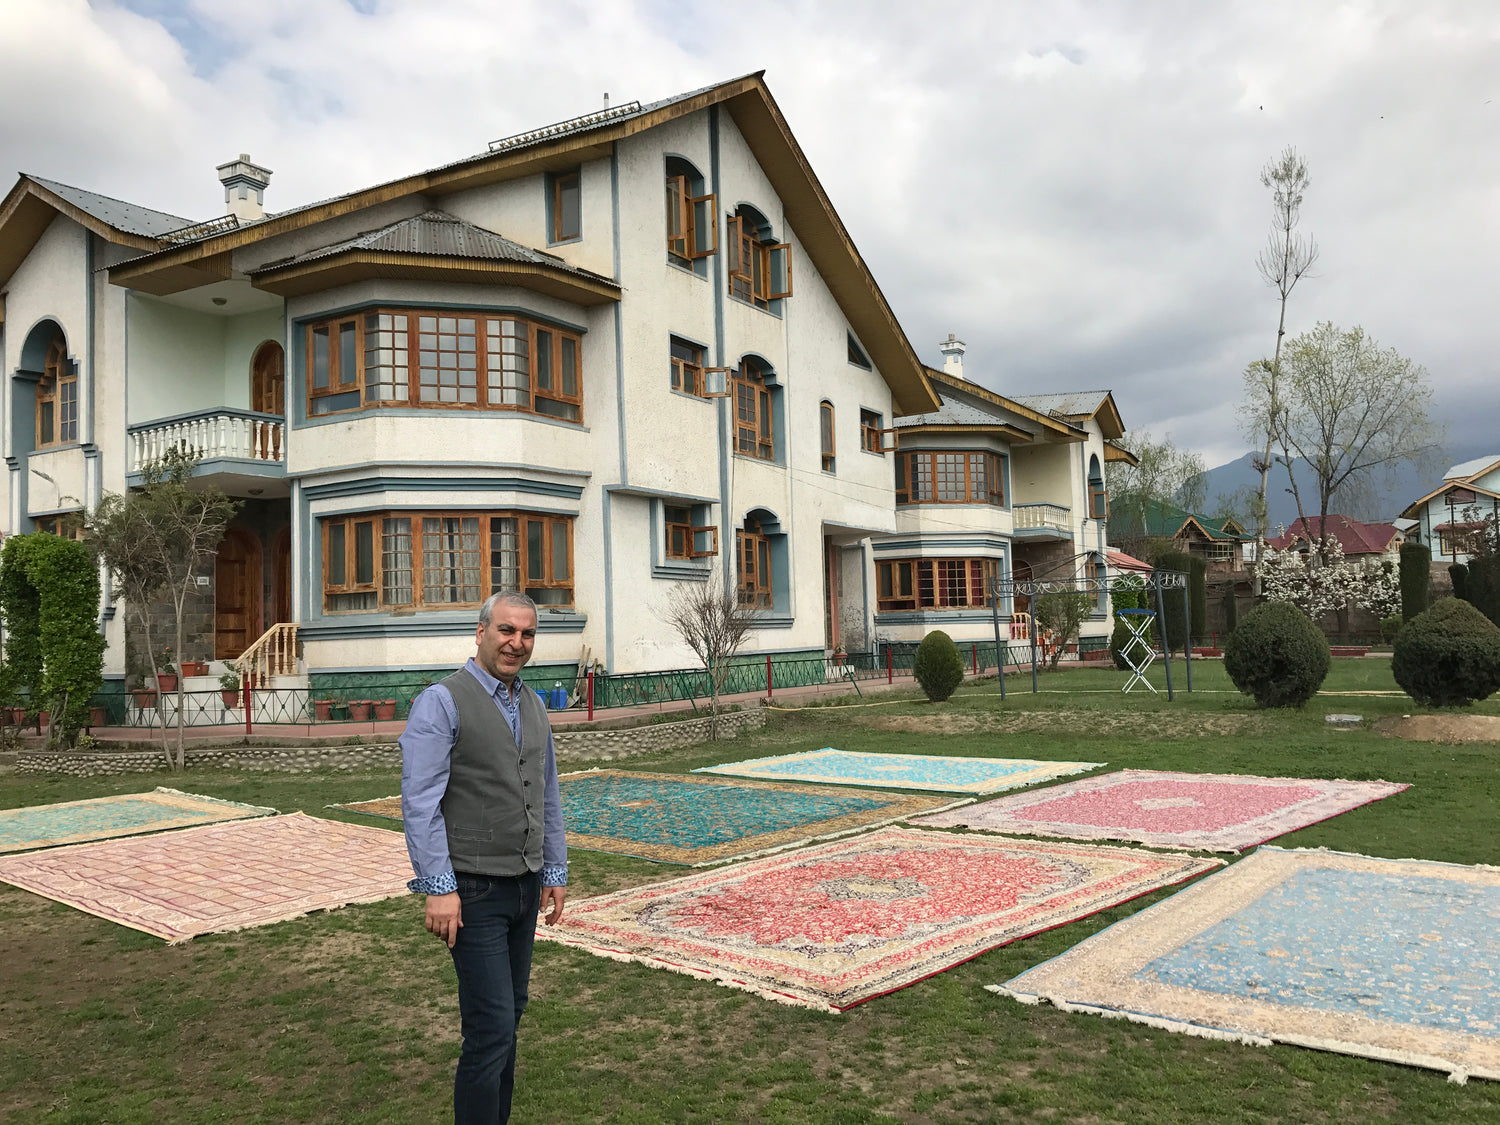 Owner showing rugs outside a house